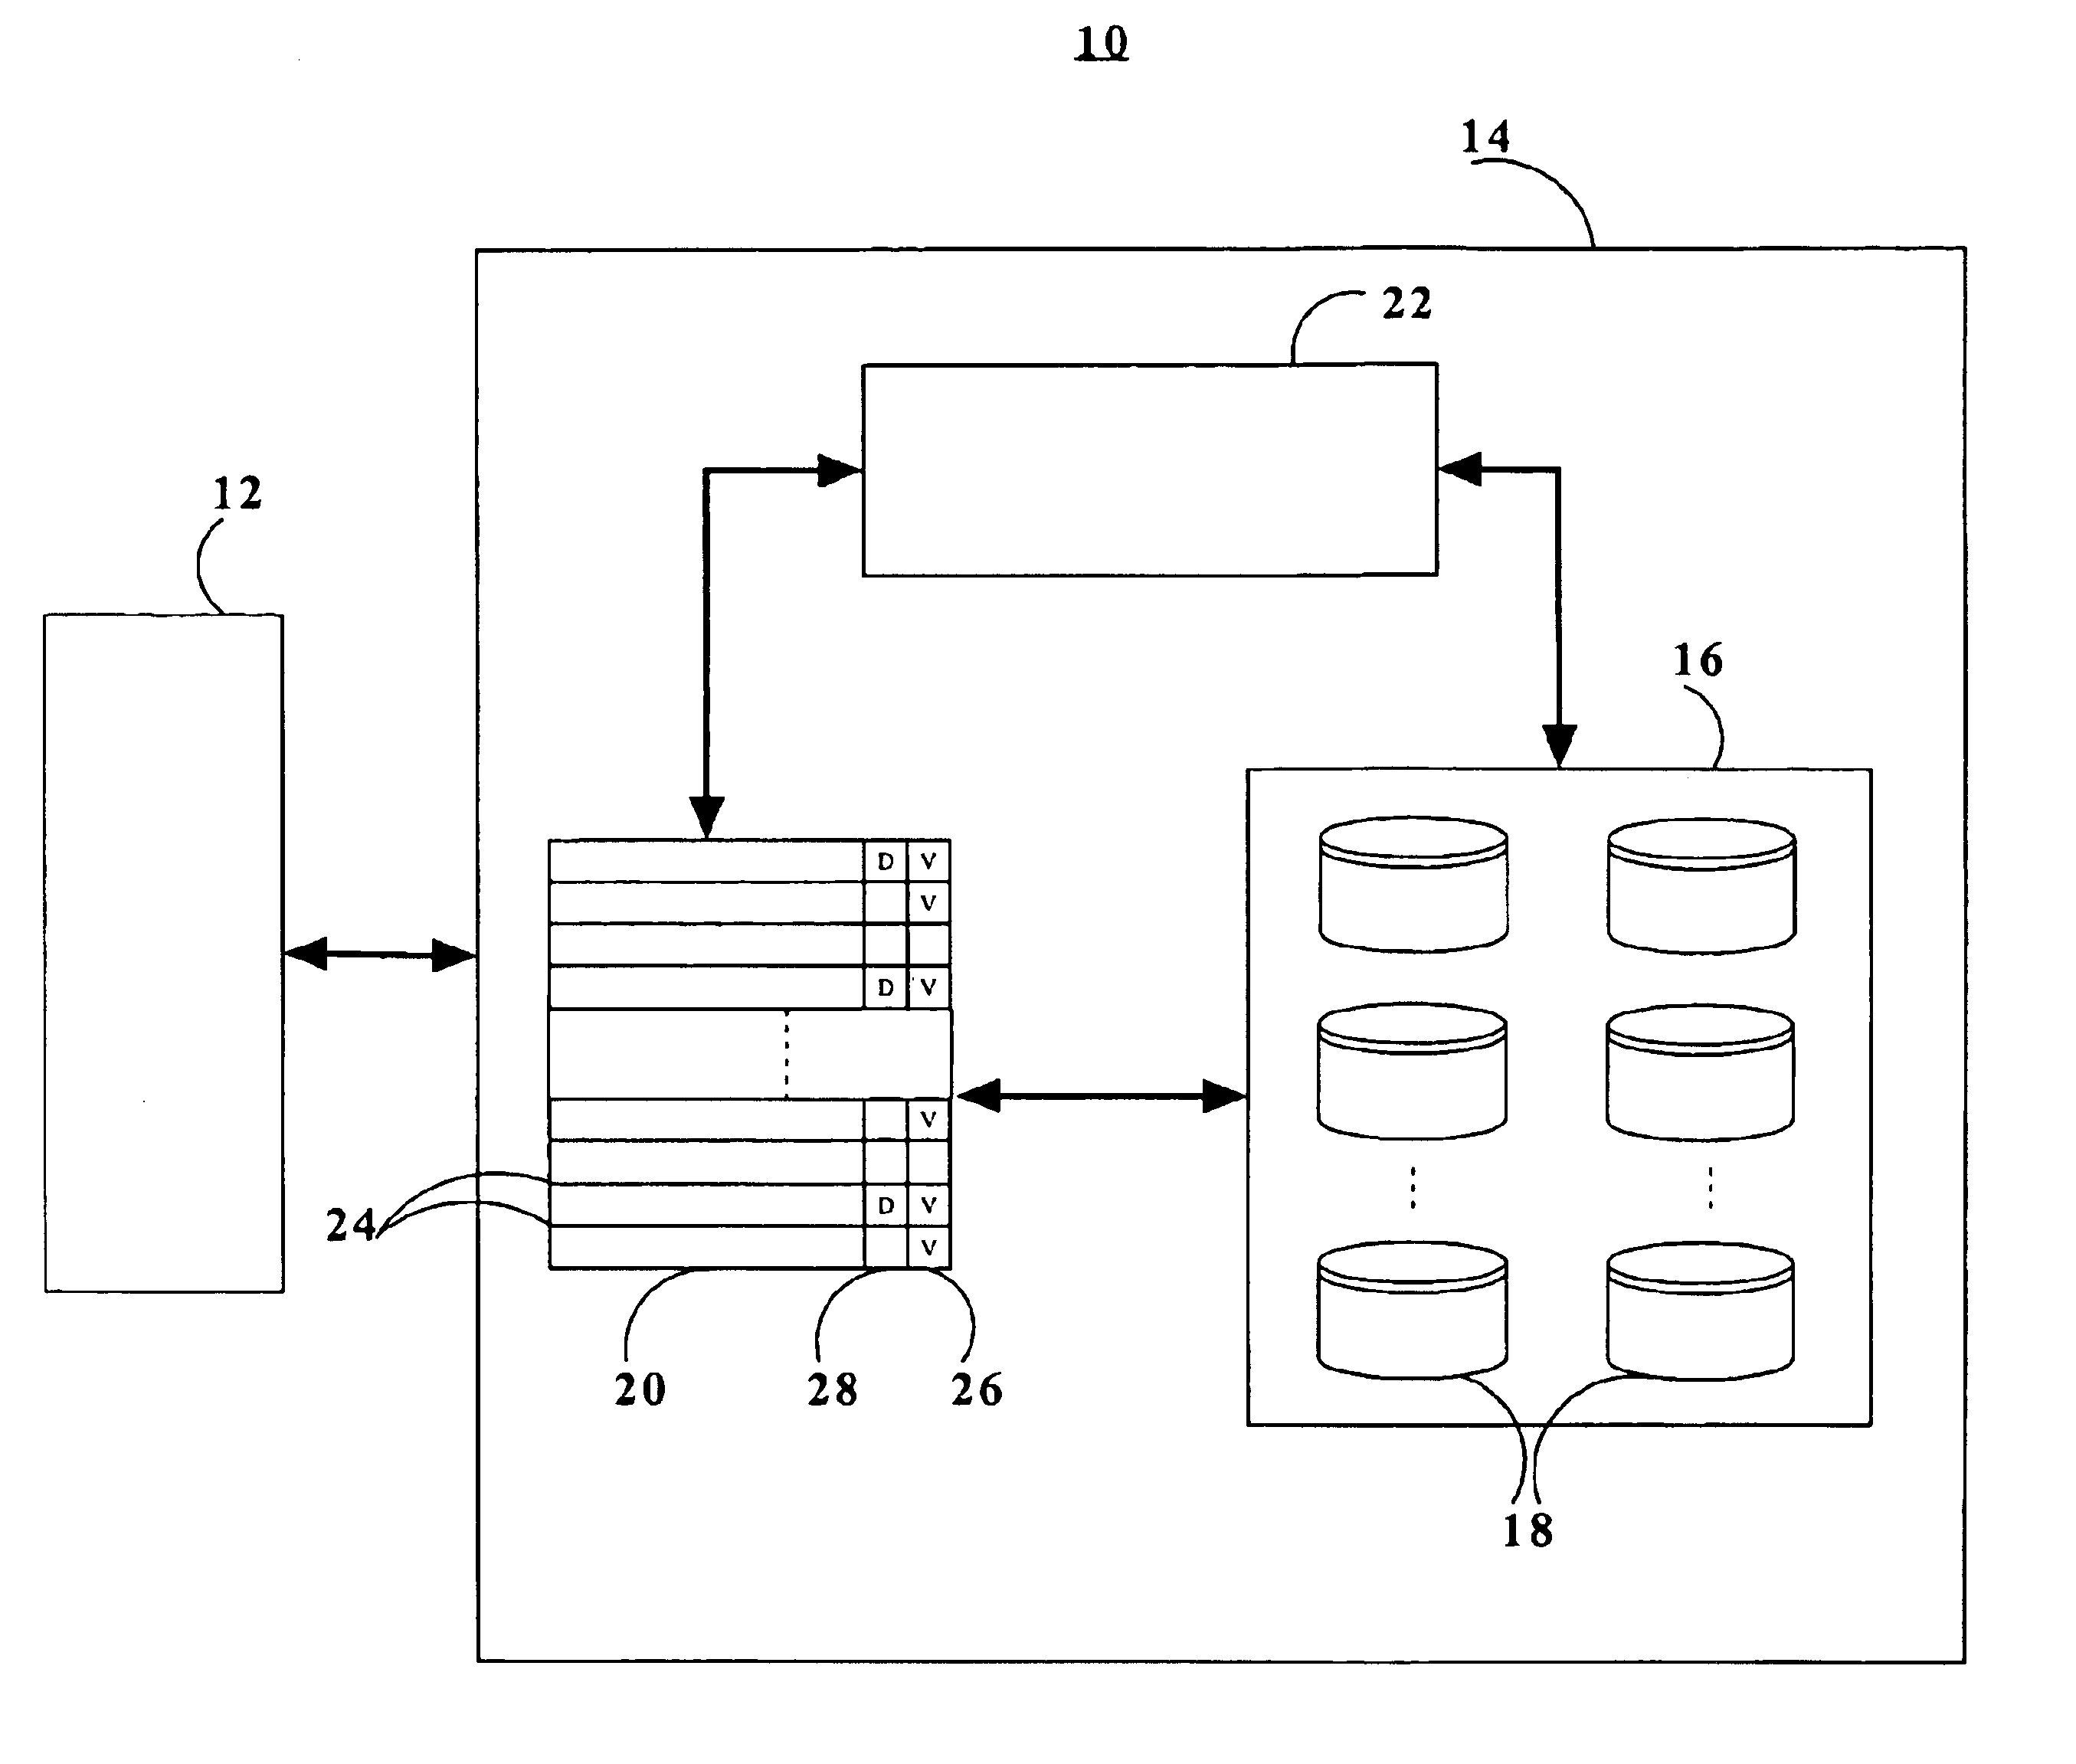 Provision of a victim cache within a storage cache hierarchy